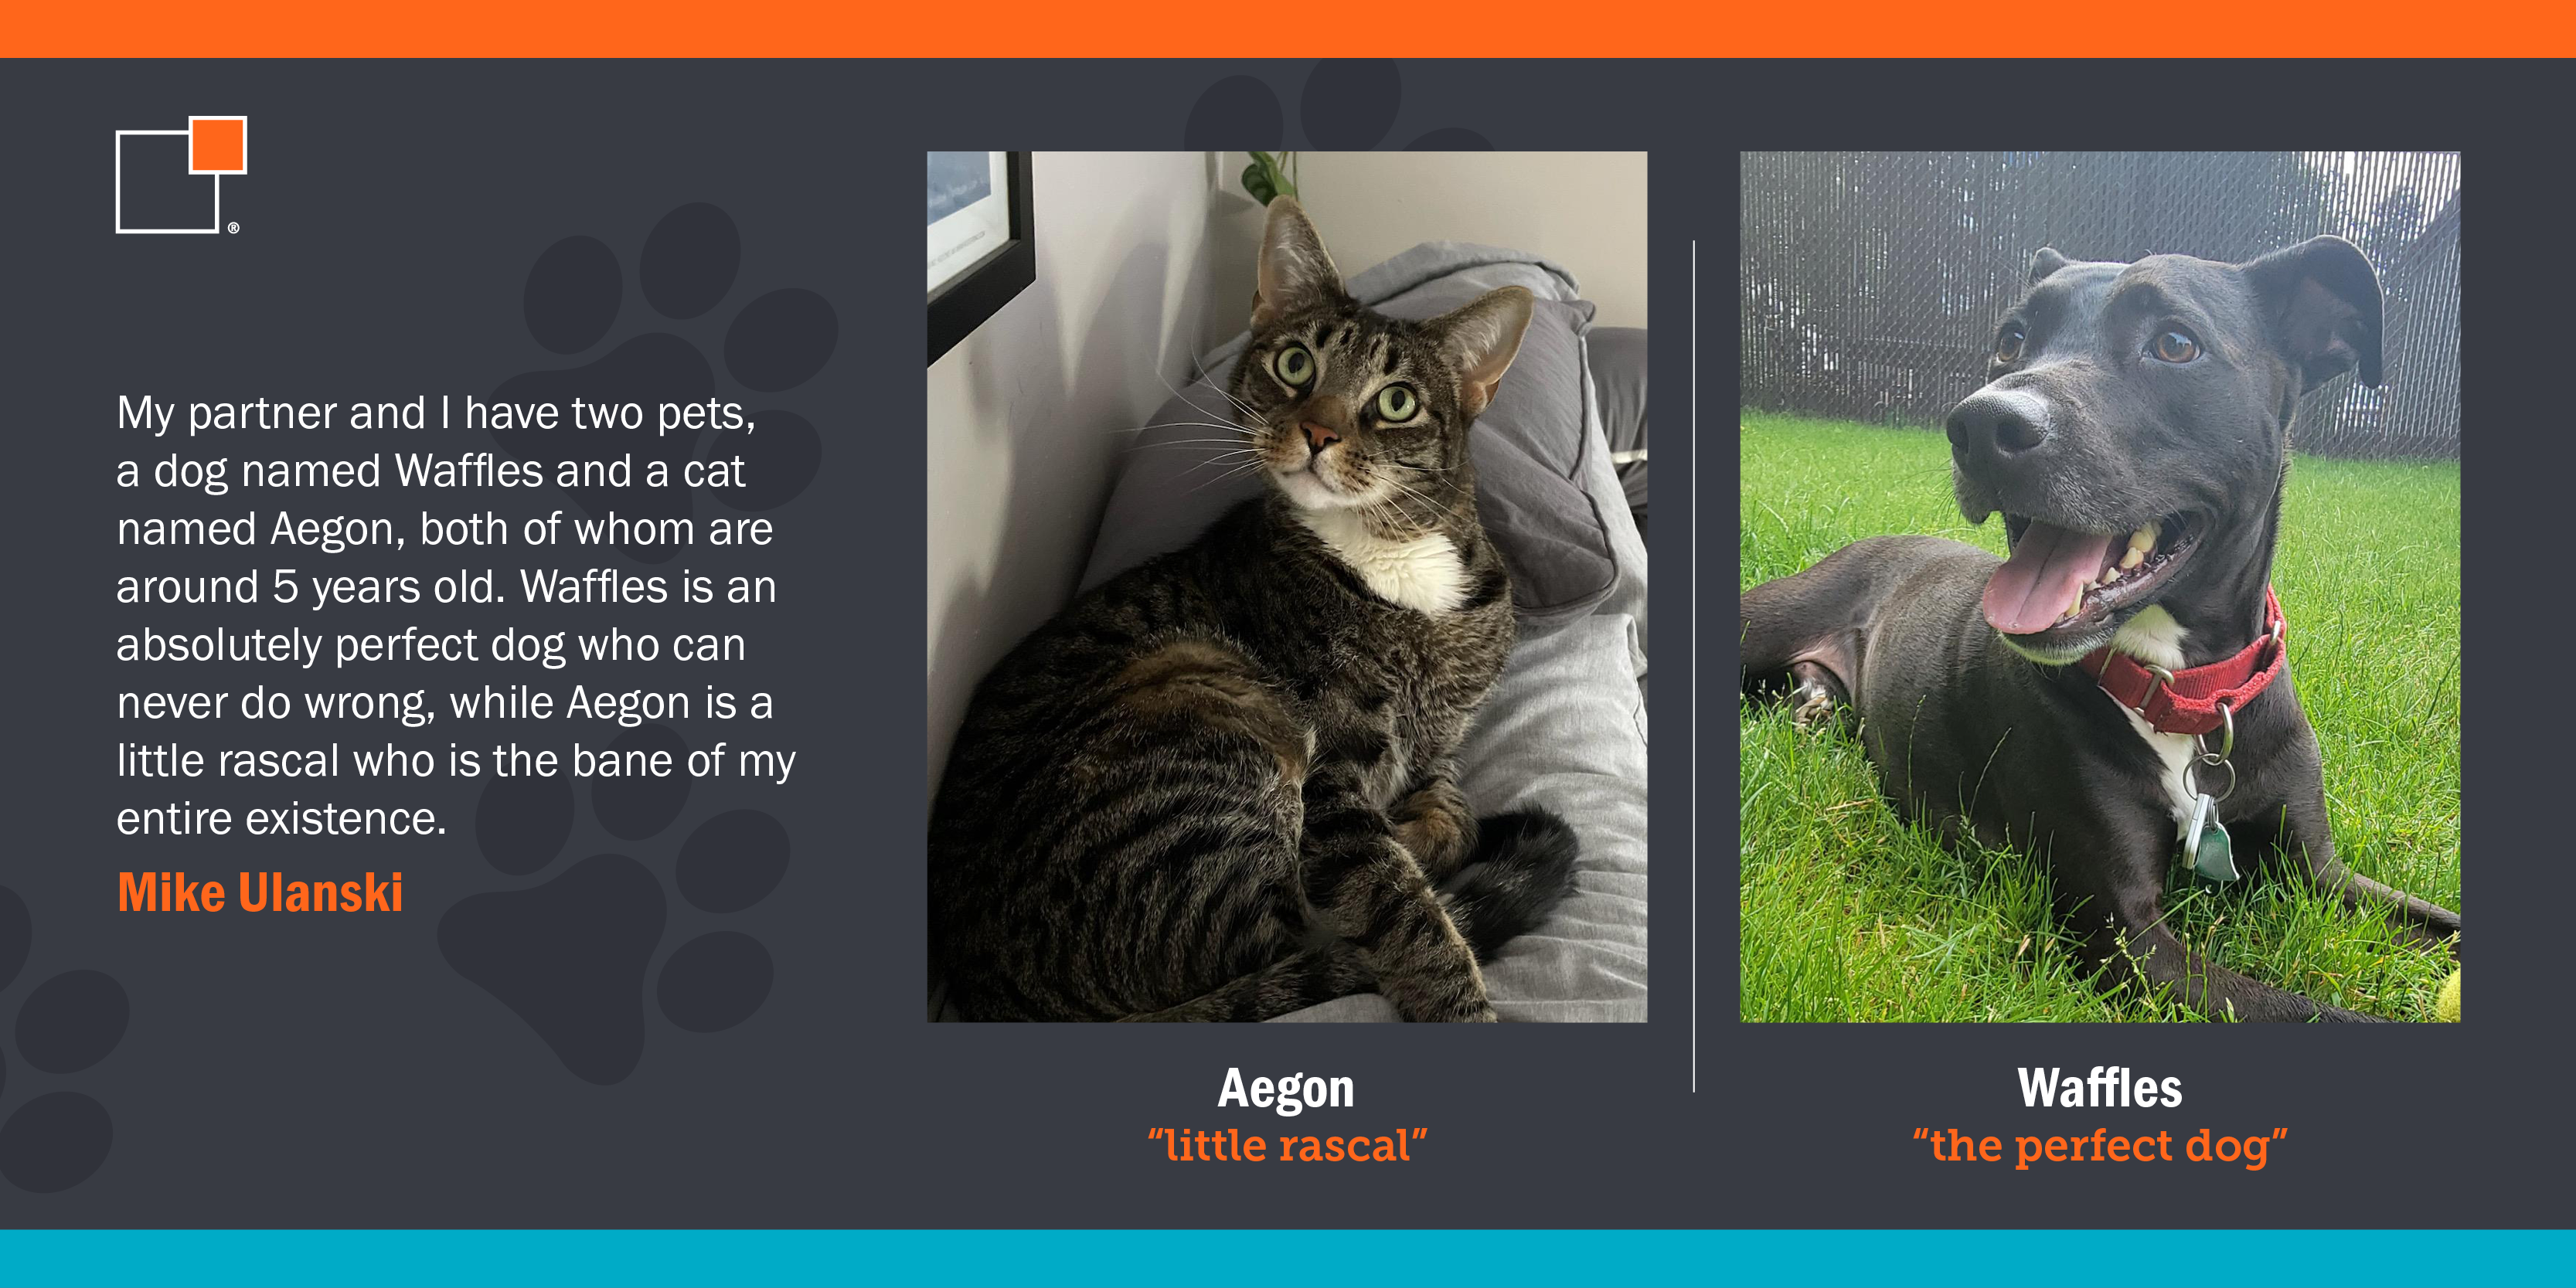 Photo of Aegon the cat or "little rascal" and Waffles "the perfect dog"